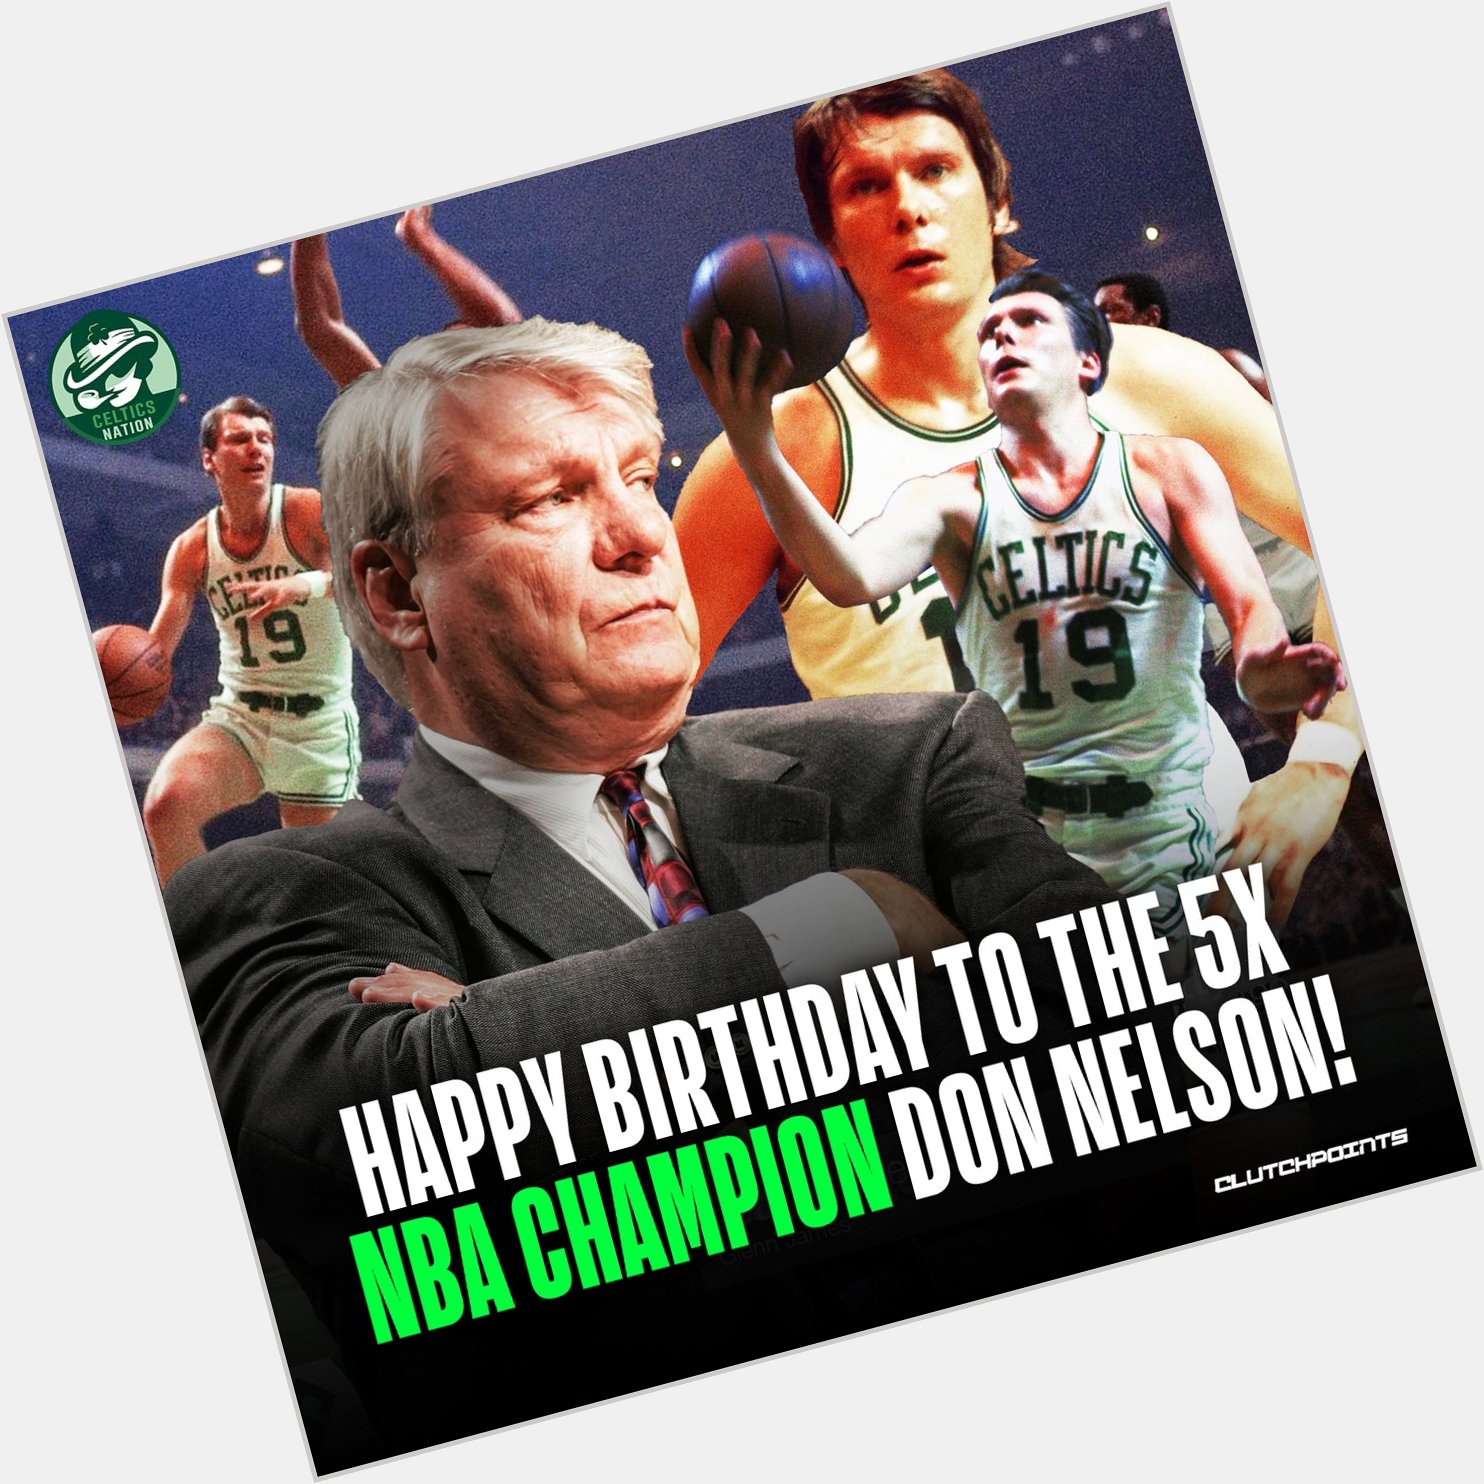 Celtics Nation, let\s all wish Don Nelson a very Happy Birthday  